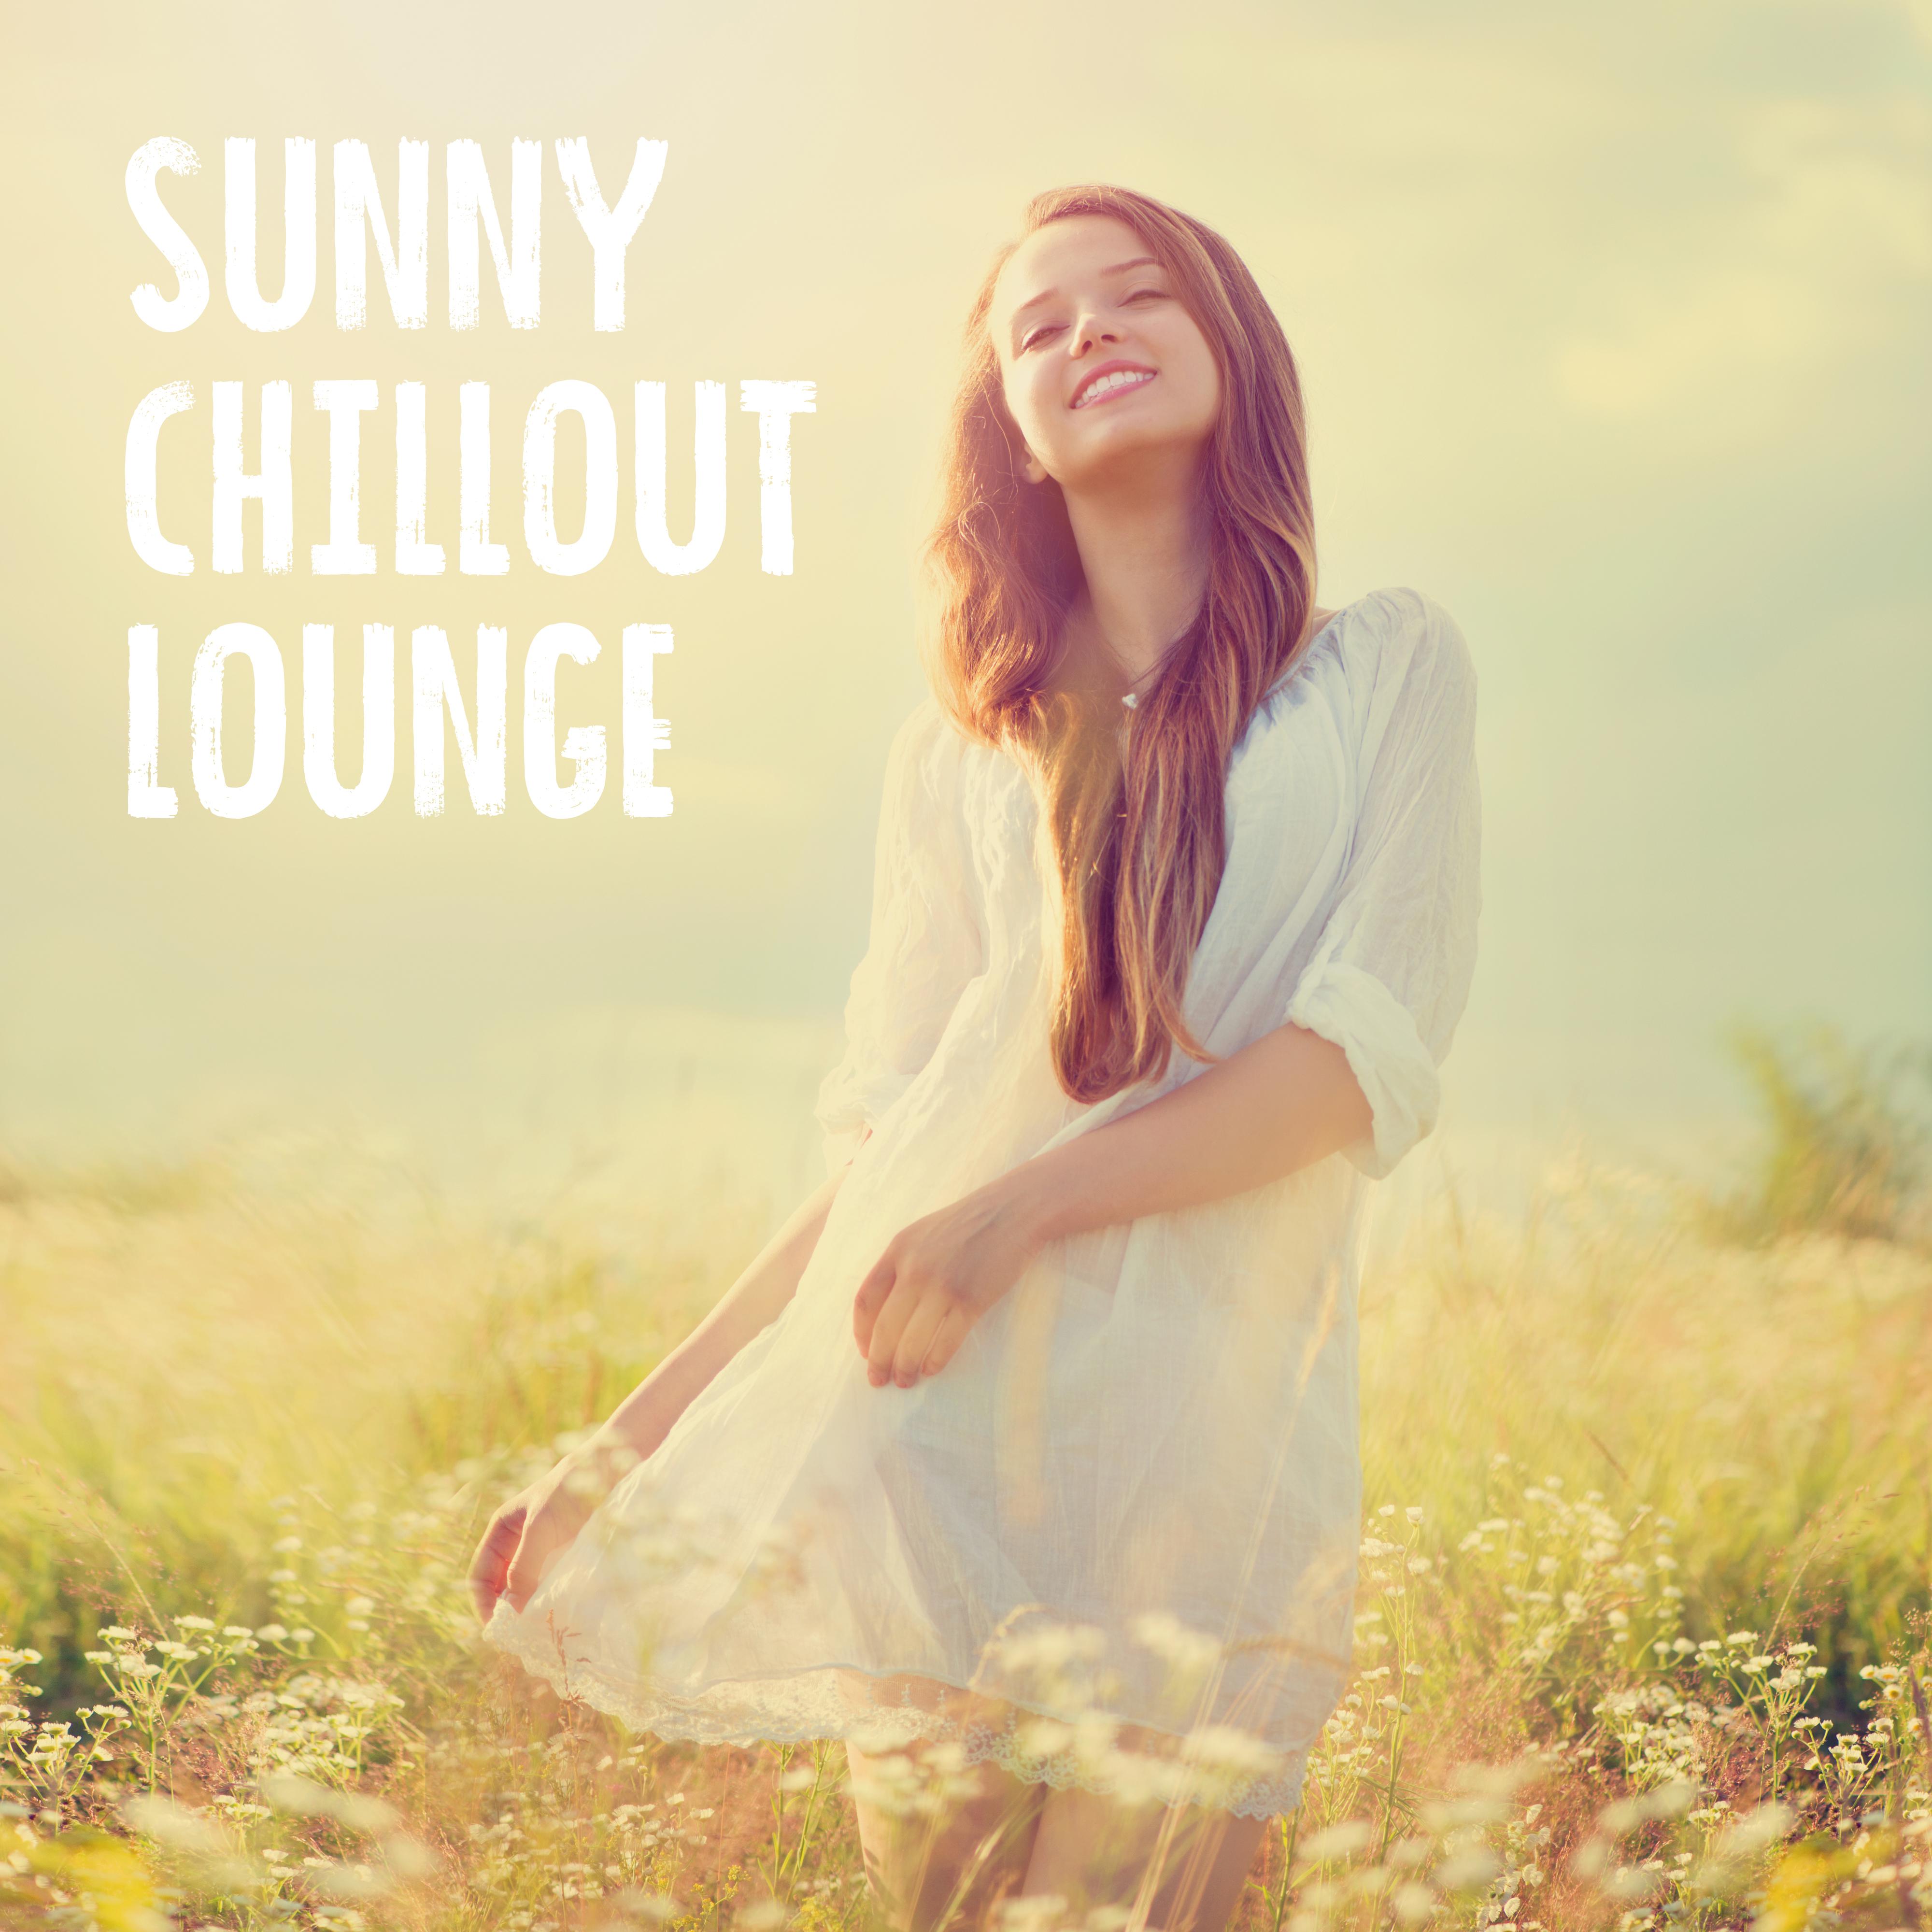 Sunny Chillout Lounge: Hot Ibiza Vibrations, Chillout Lounge, Summer Music, Relax, Tropical Party, Chilled Ibiza Beats, New Chillout 2019, Lounge